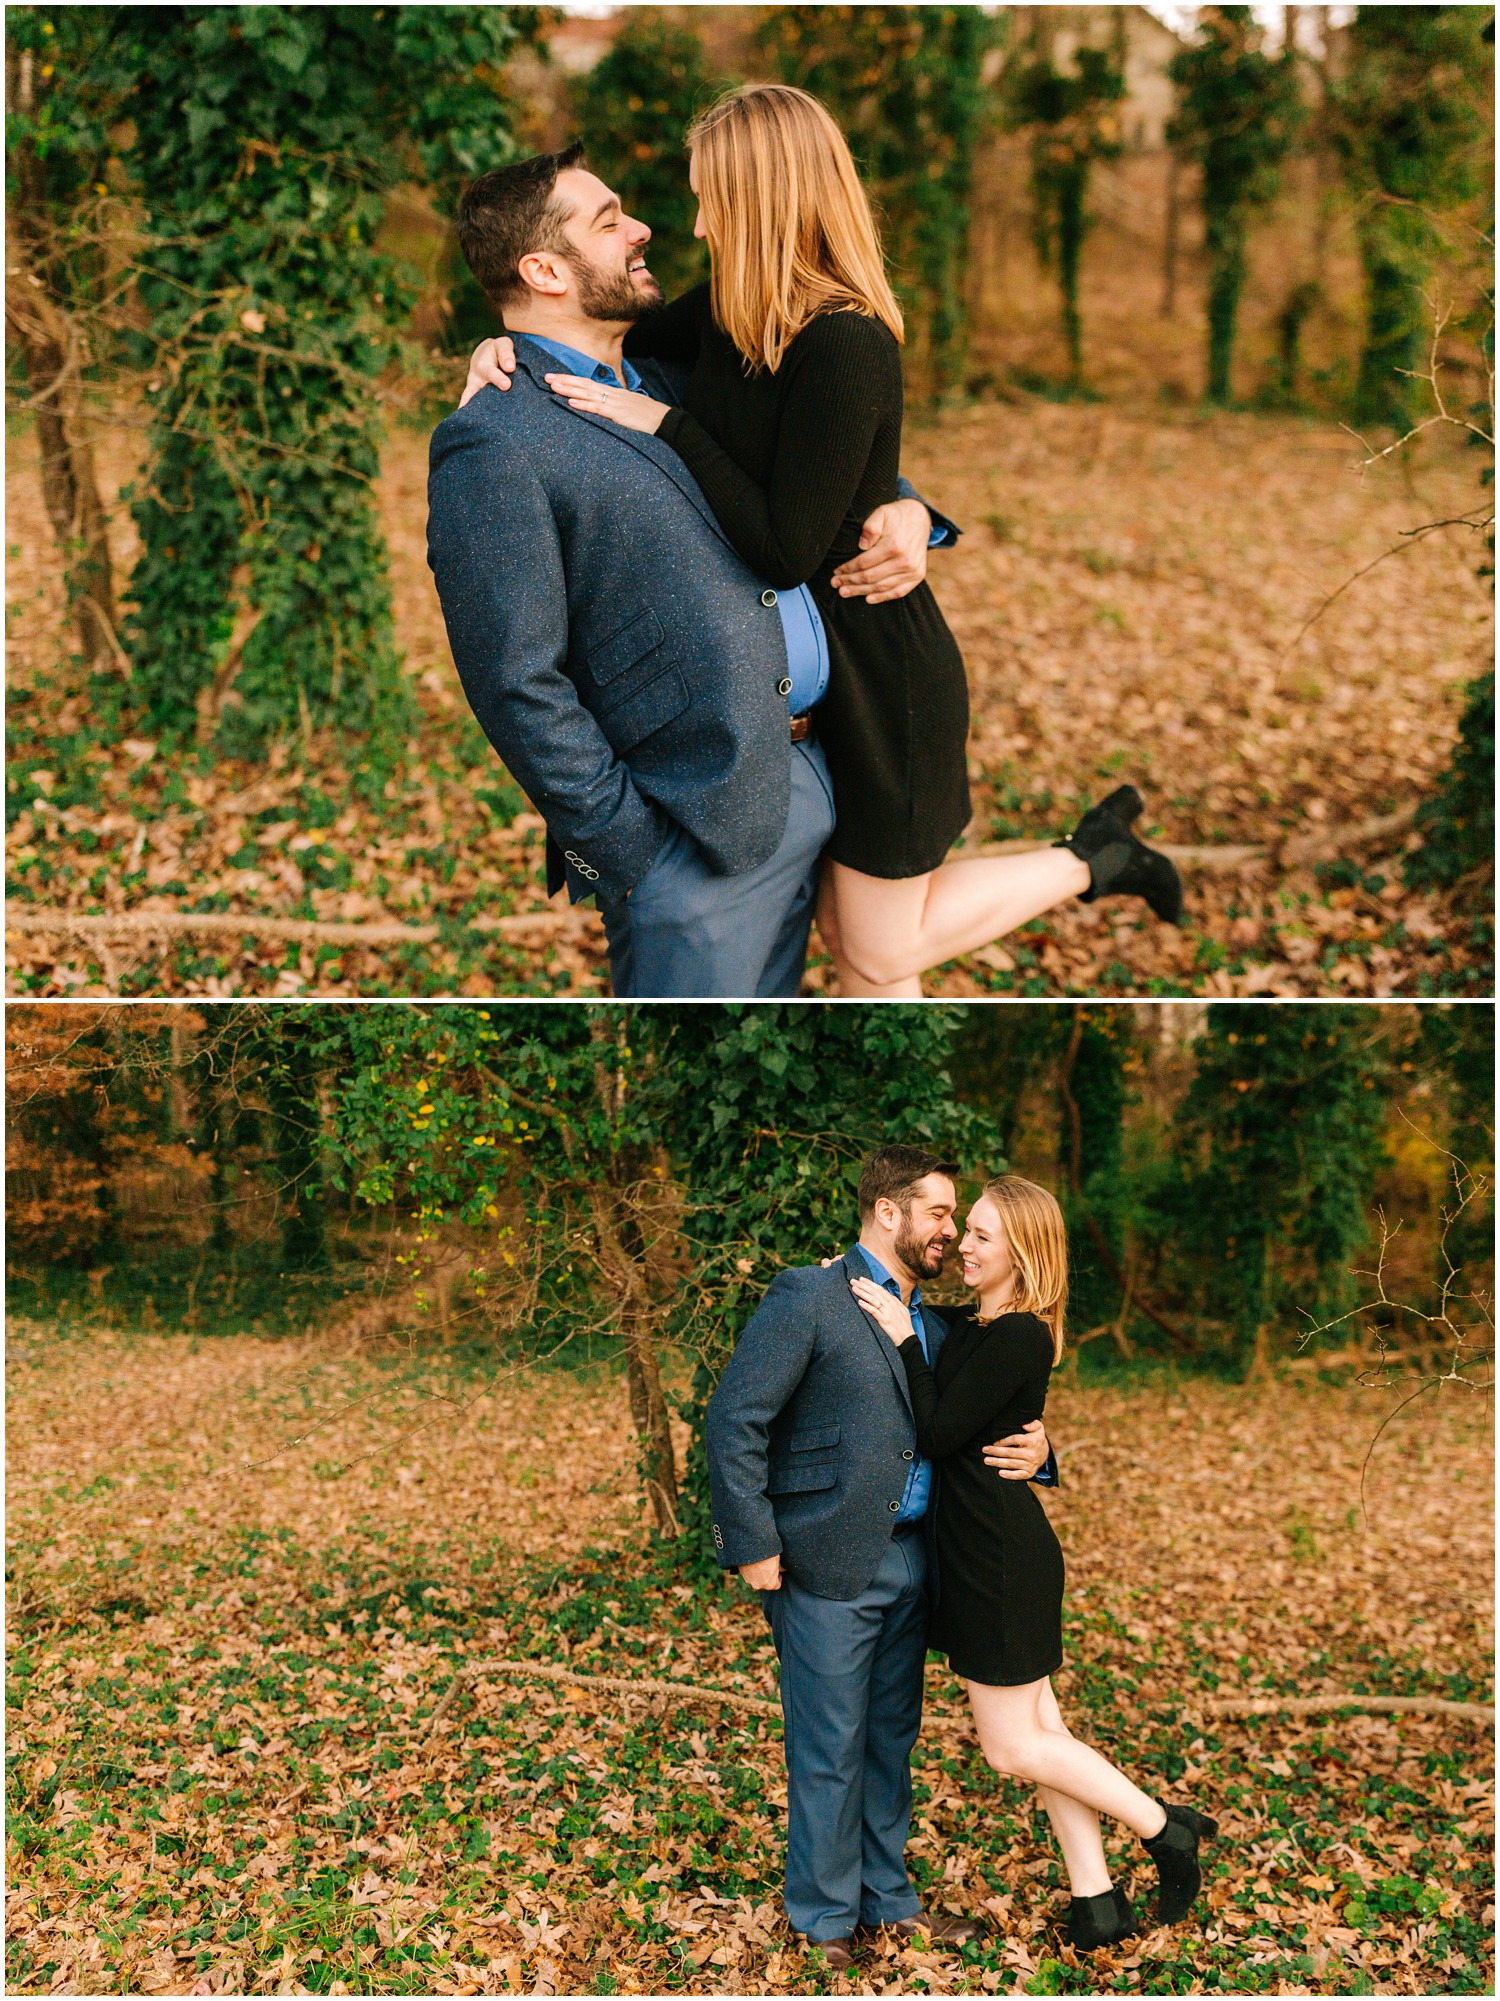 Winter Engagement session in Charlotte North Carolina with groom in suit and bride in black dress